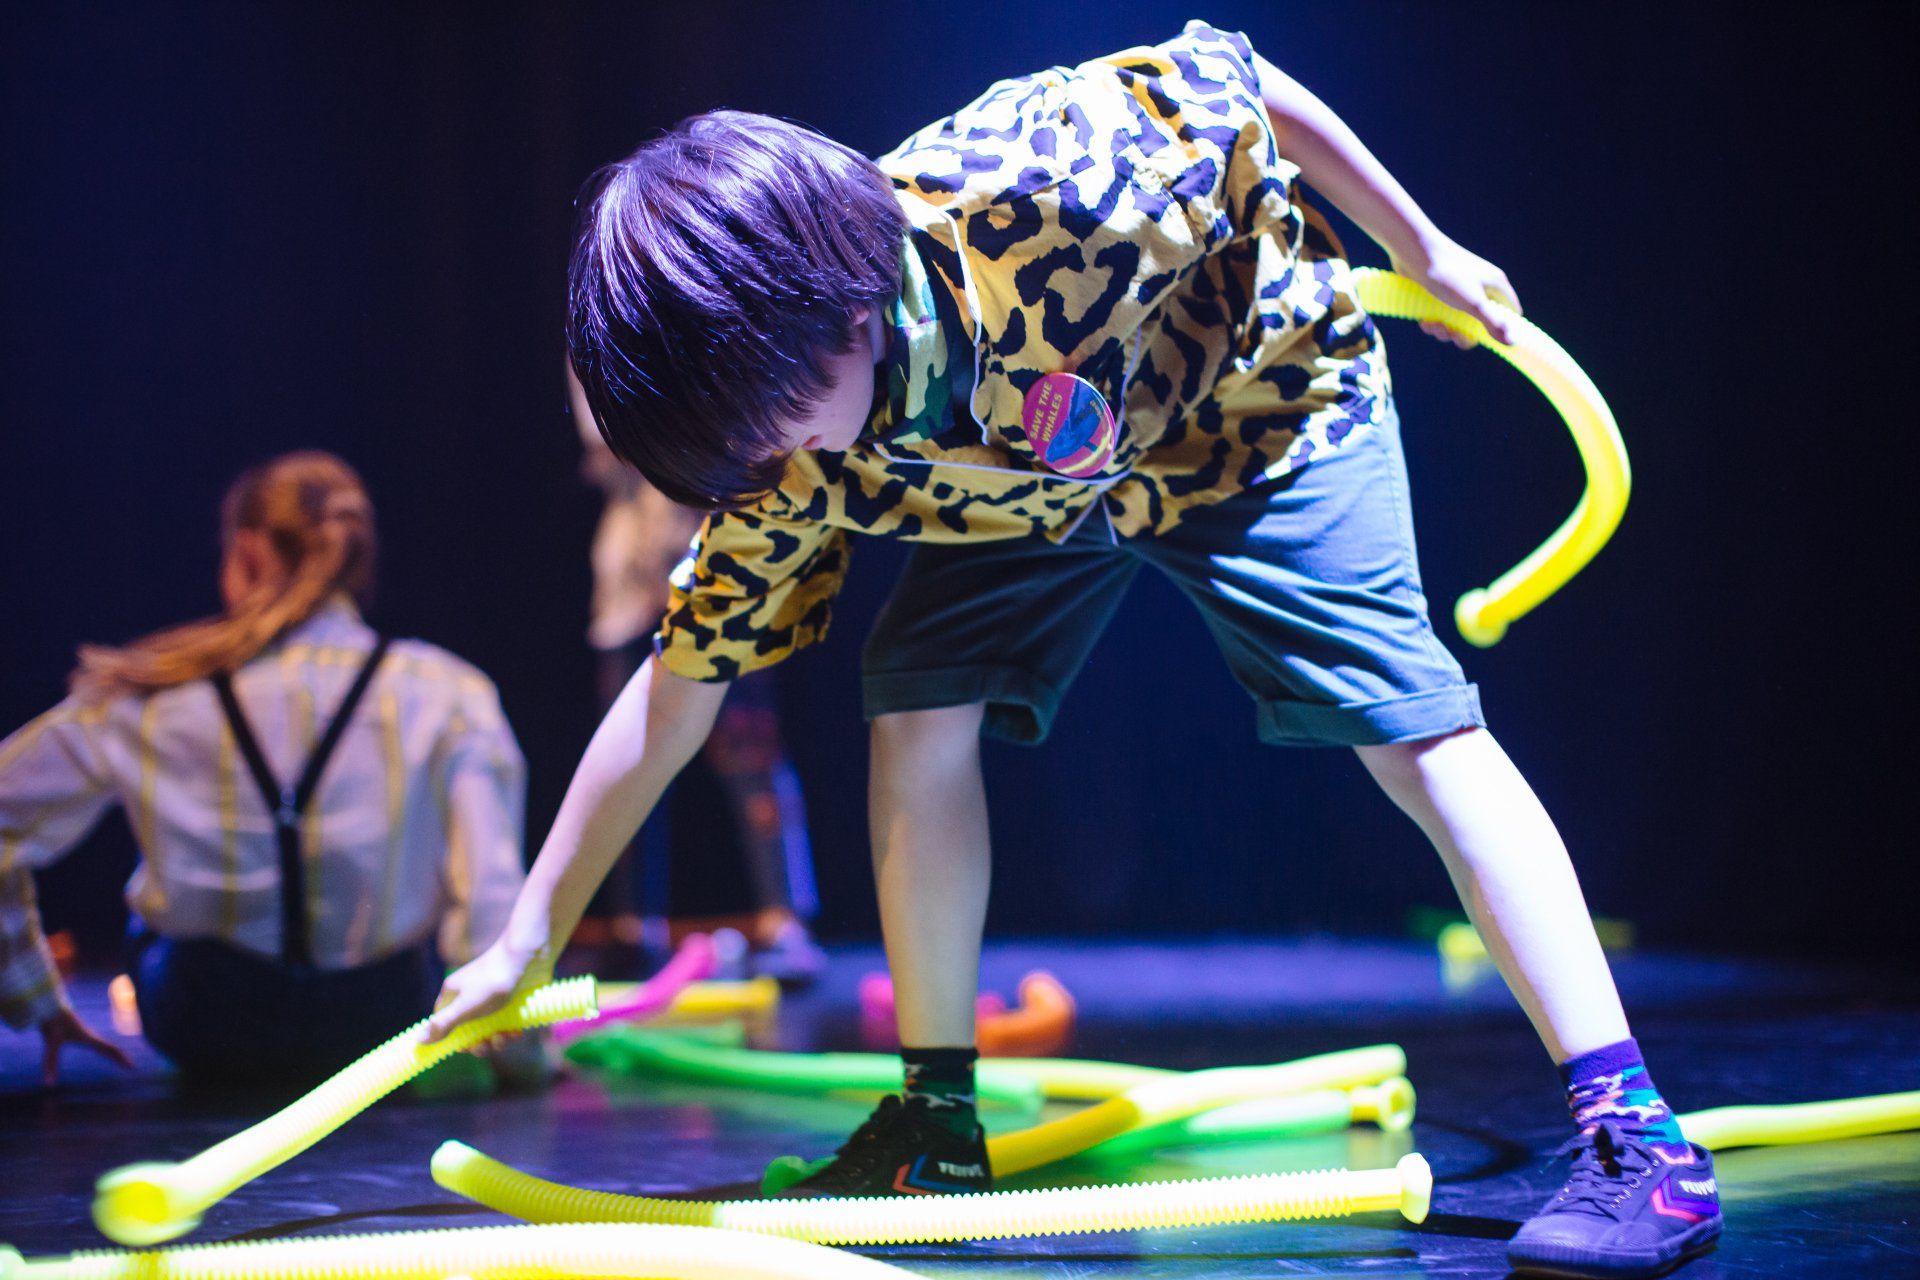 a young boy is playing with a bunch of yellow sticks on a stage